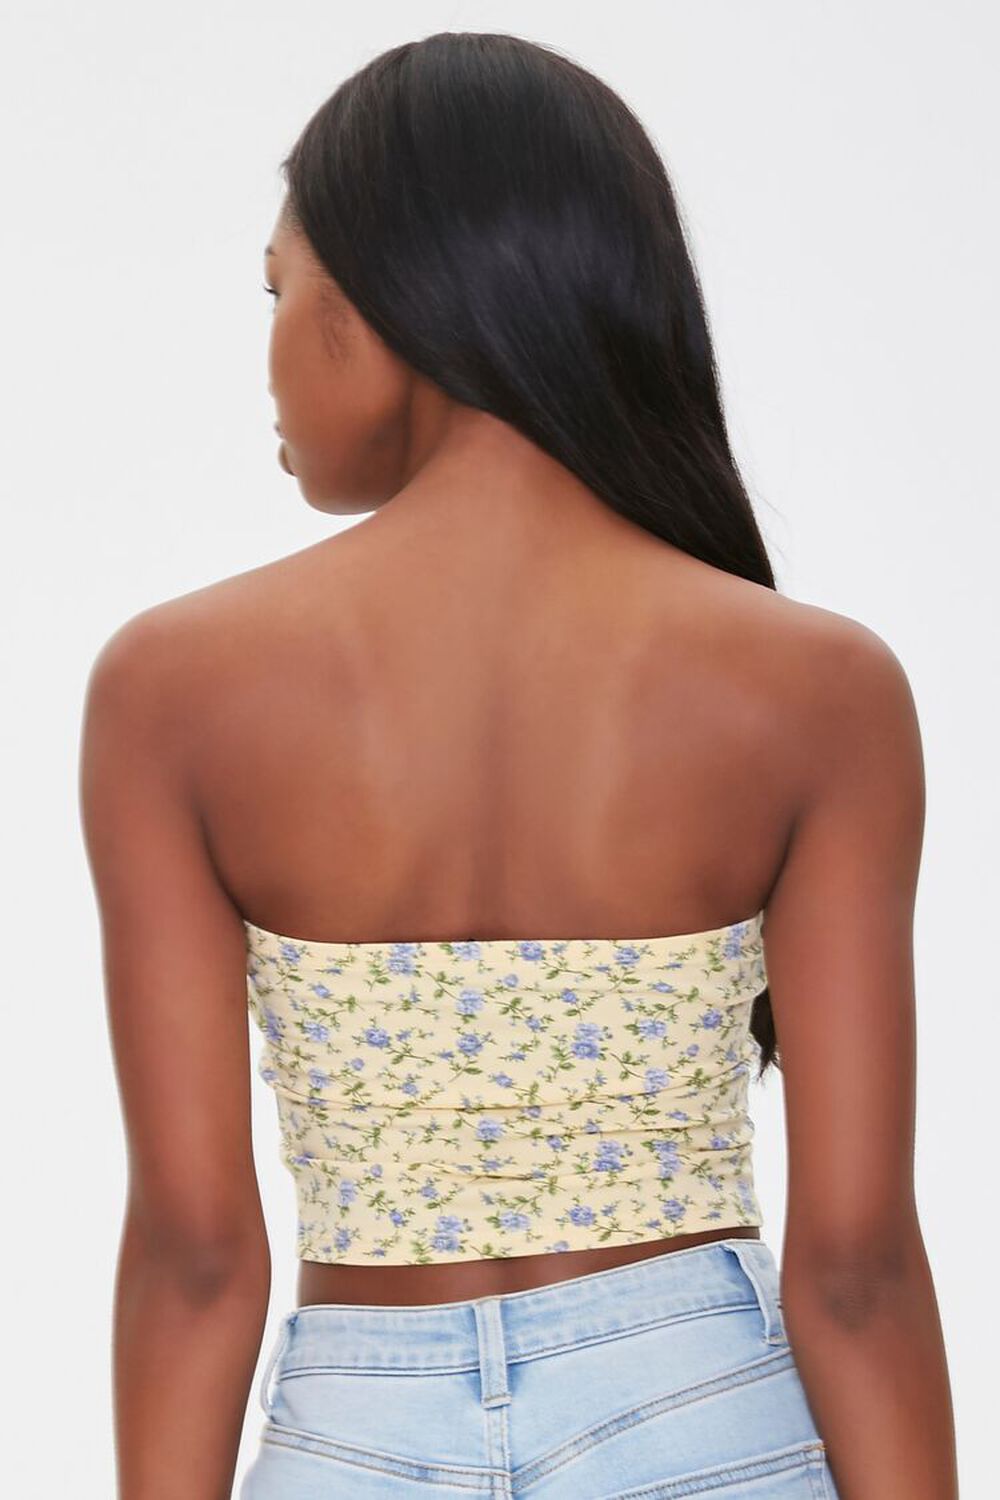 YELLOW/PERIWINKLE Floral Print Tube Top, image 3